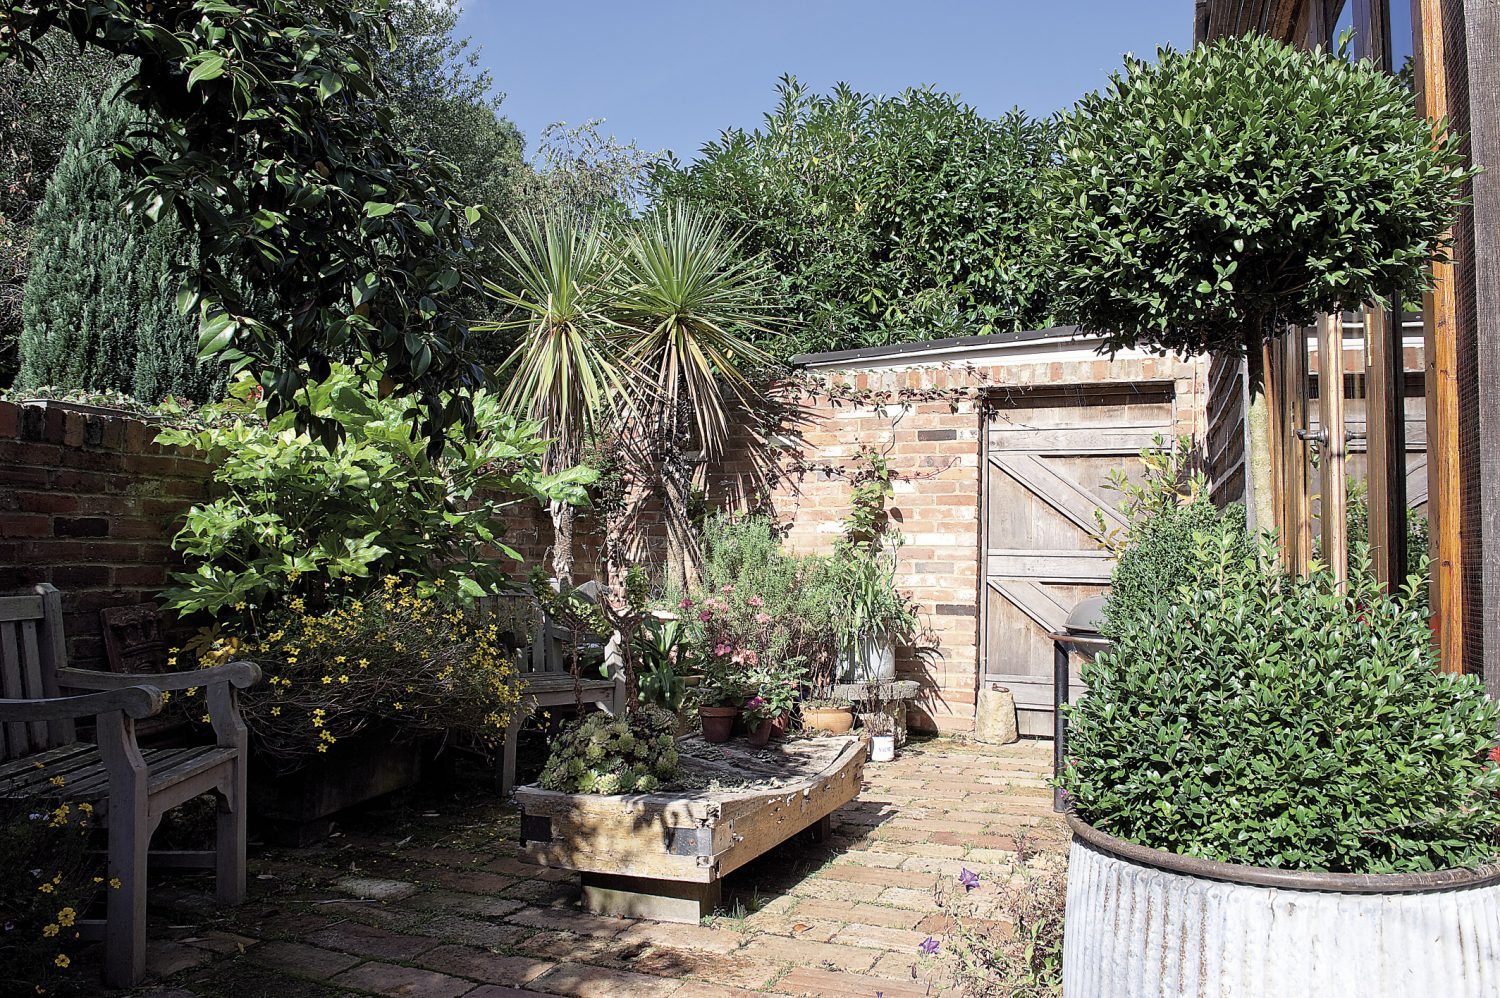 The walled, partially-decked courtyard garden is the perfect summer hideaway